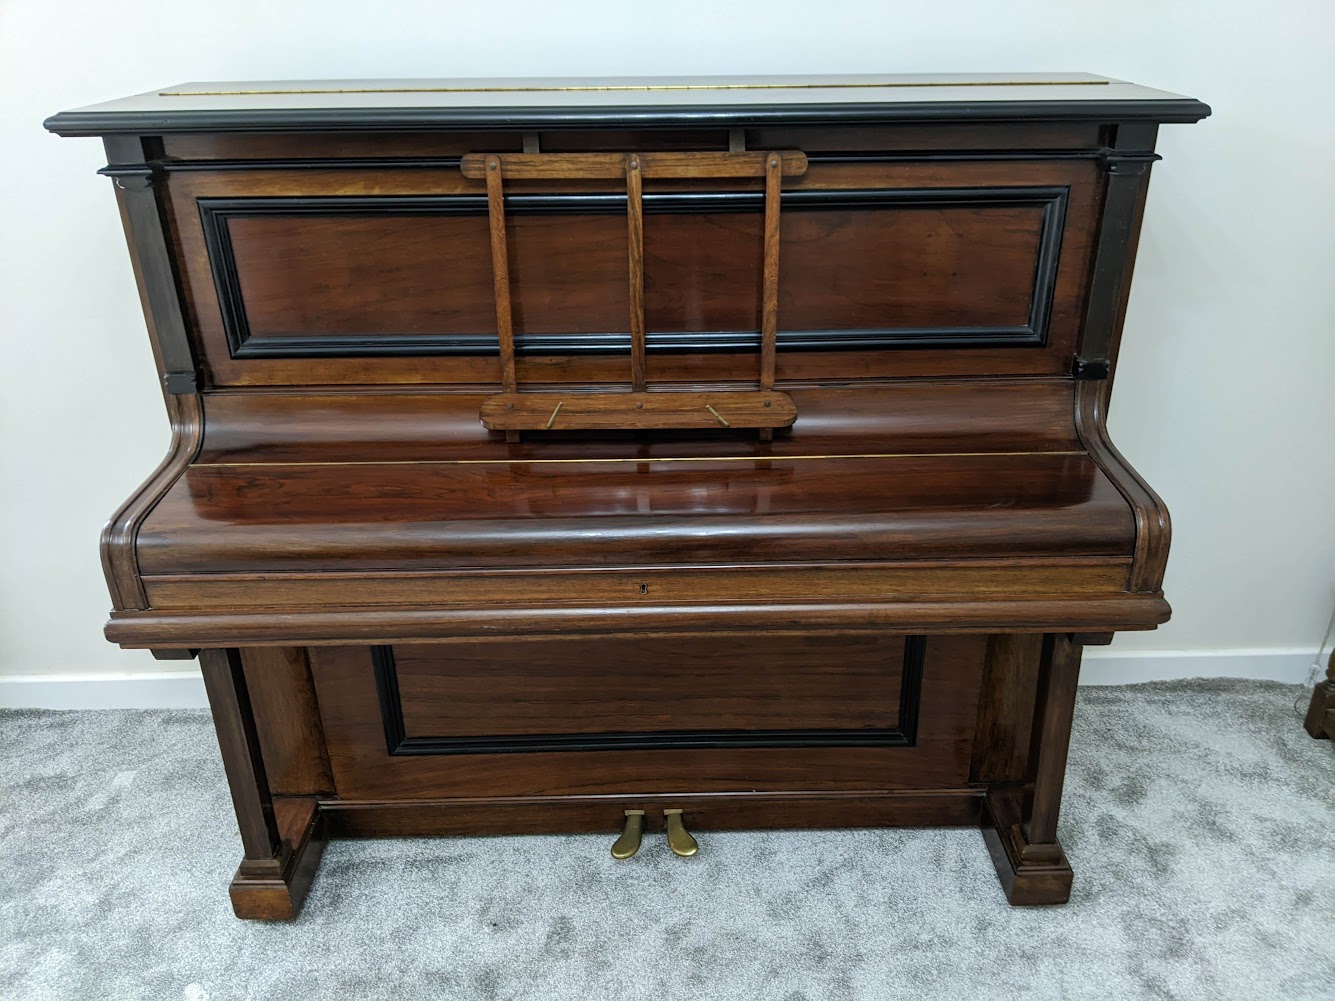 Bluthner c1896 Upright Piano with lid closed